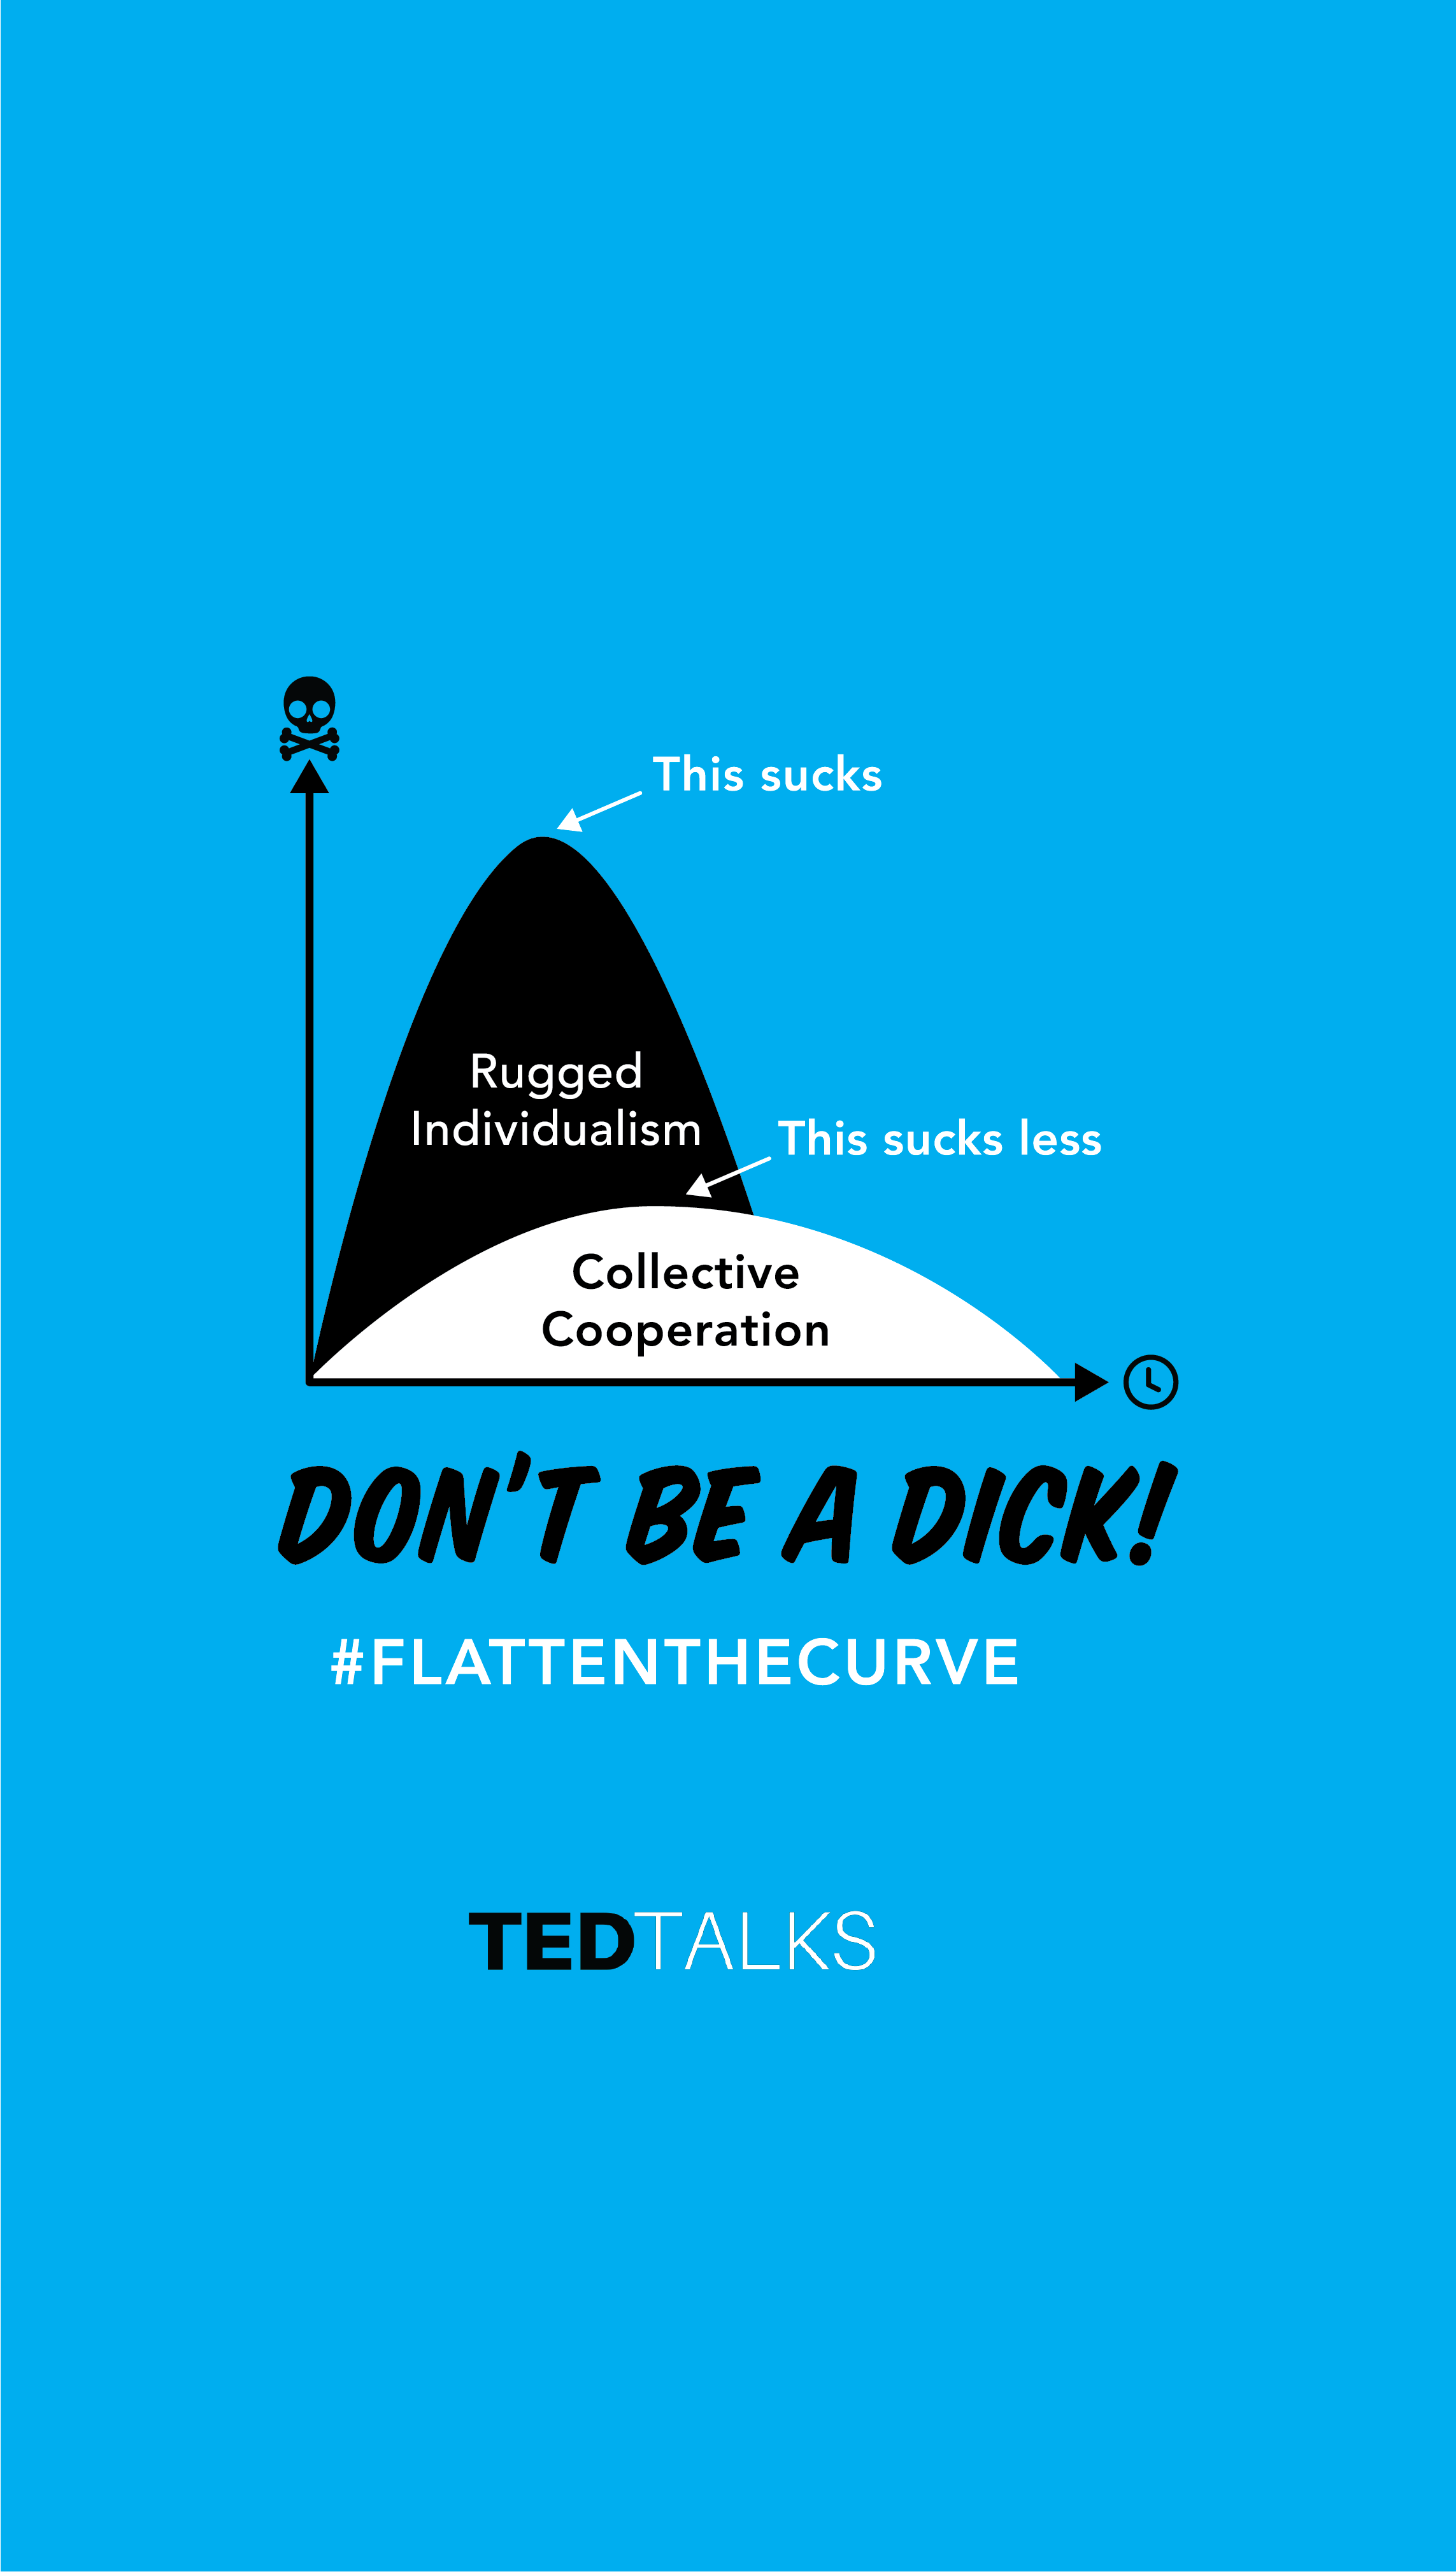 Don't be a dick! #Flattenthecurve